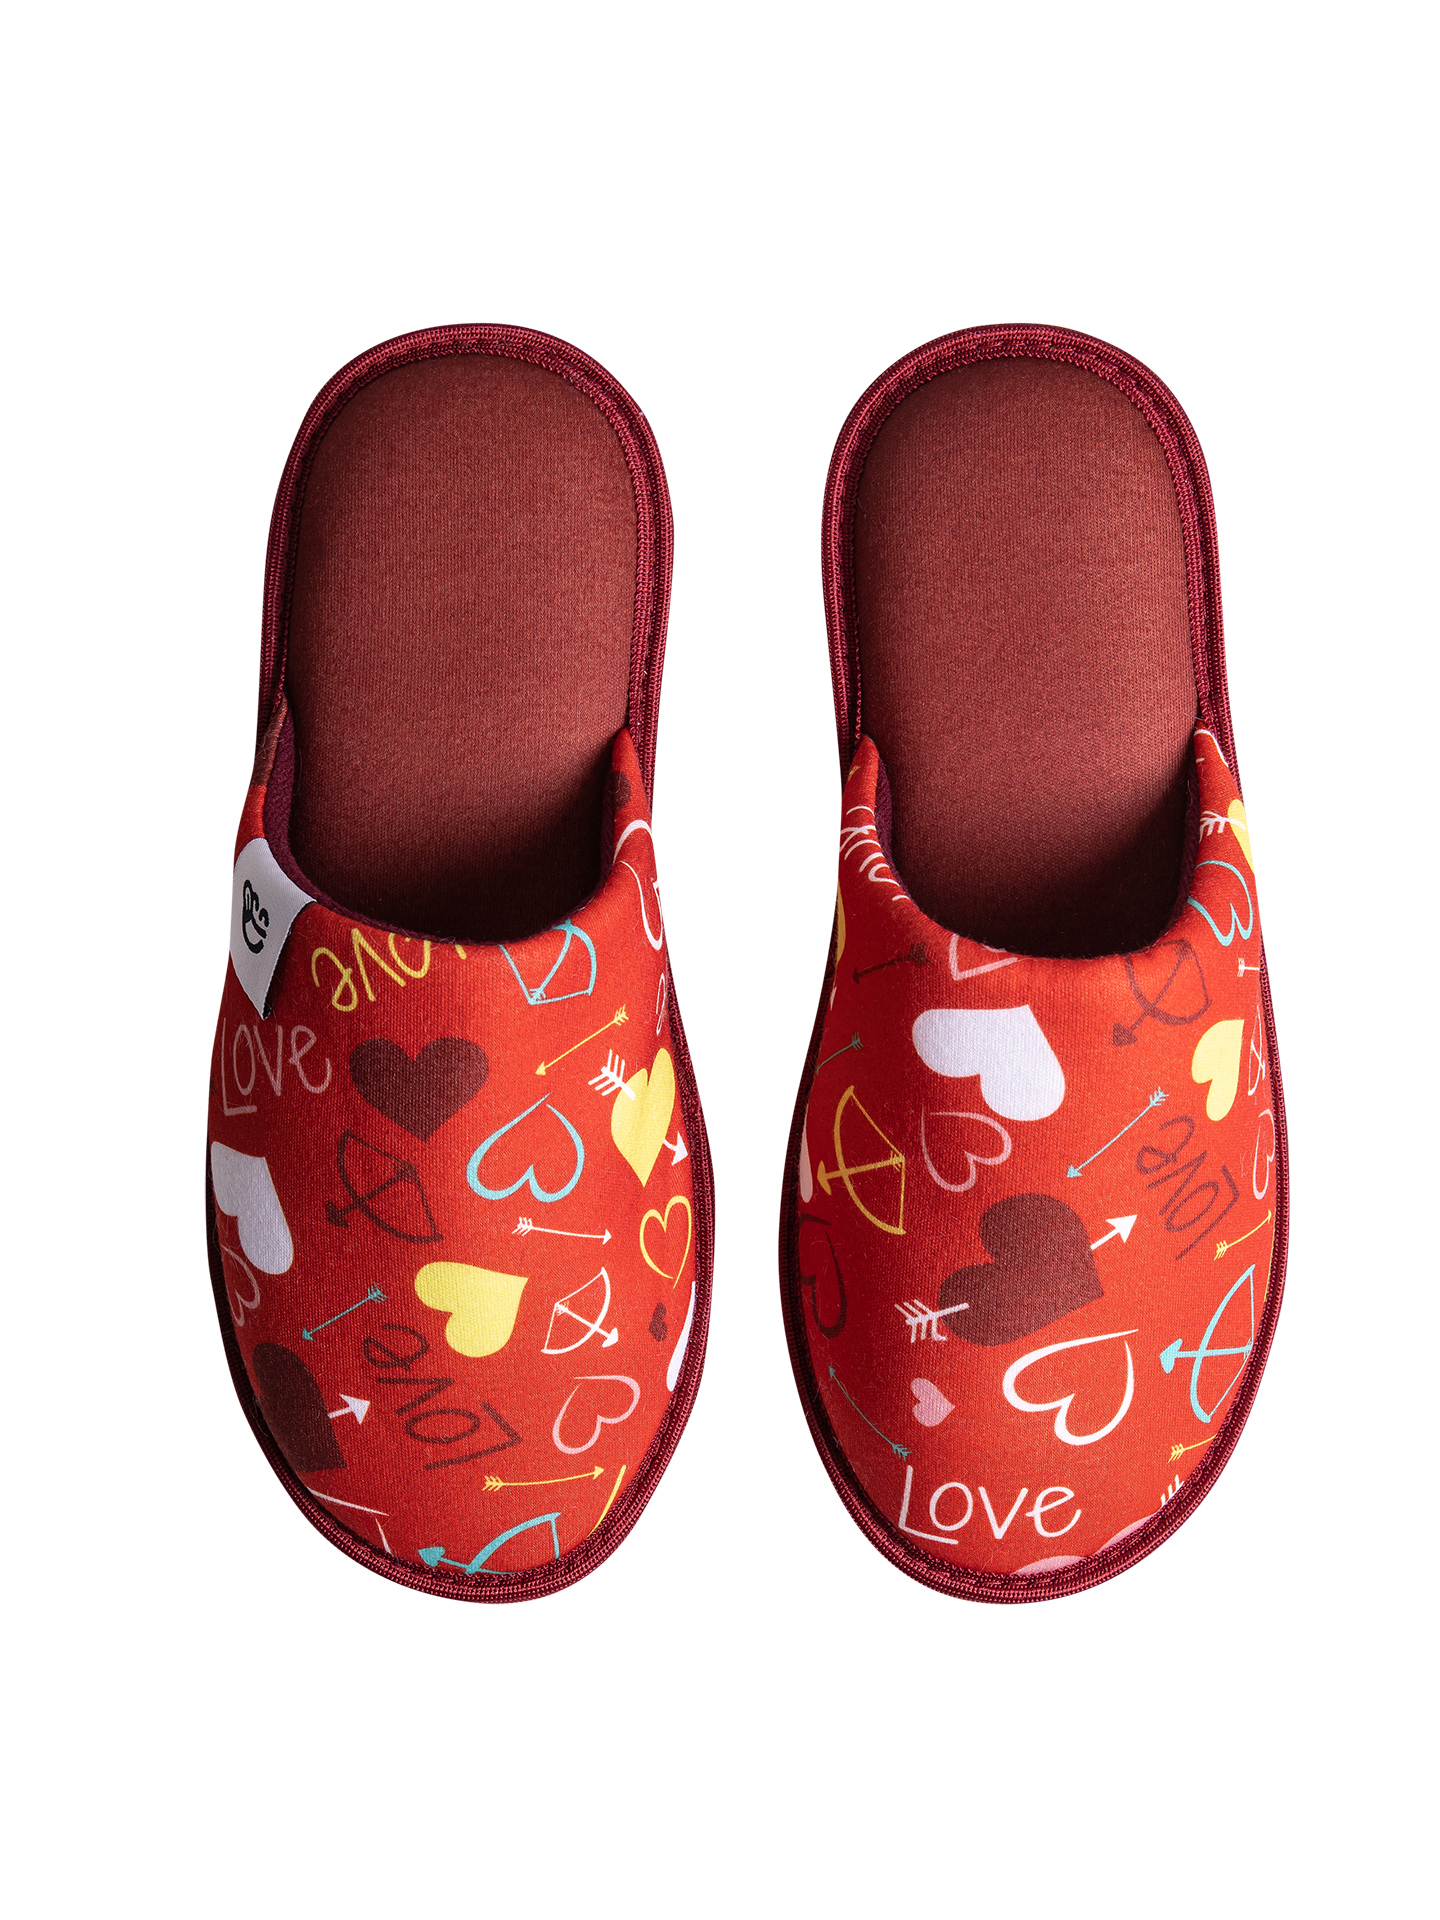 Slippers Hearts